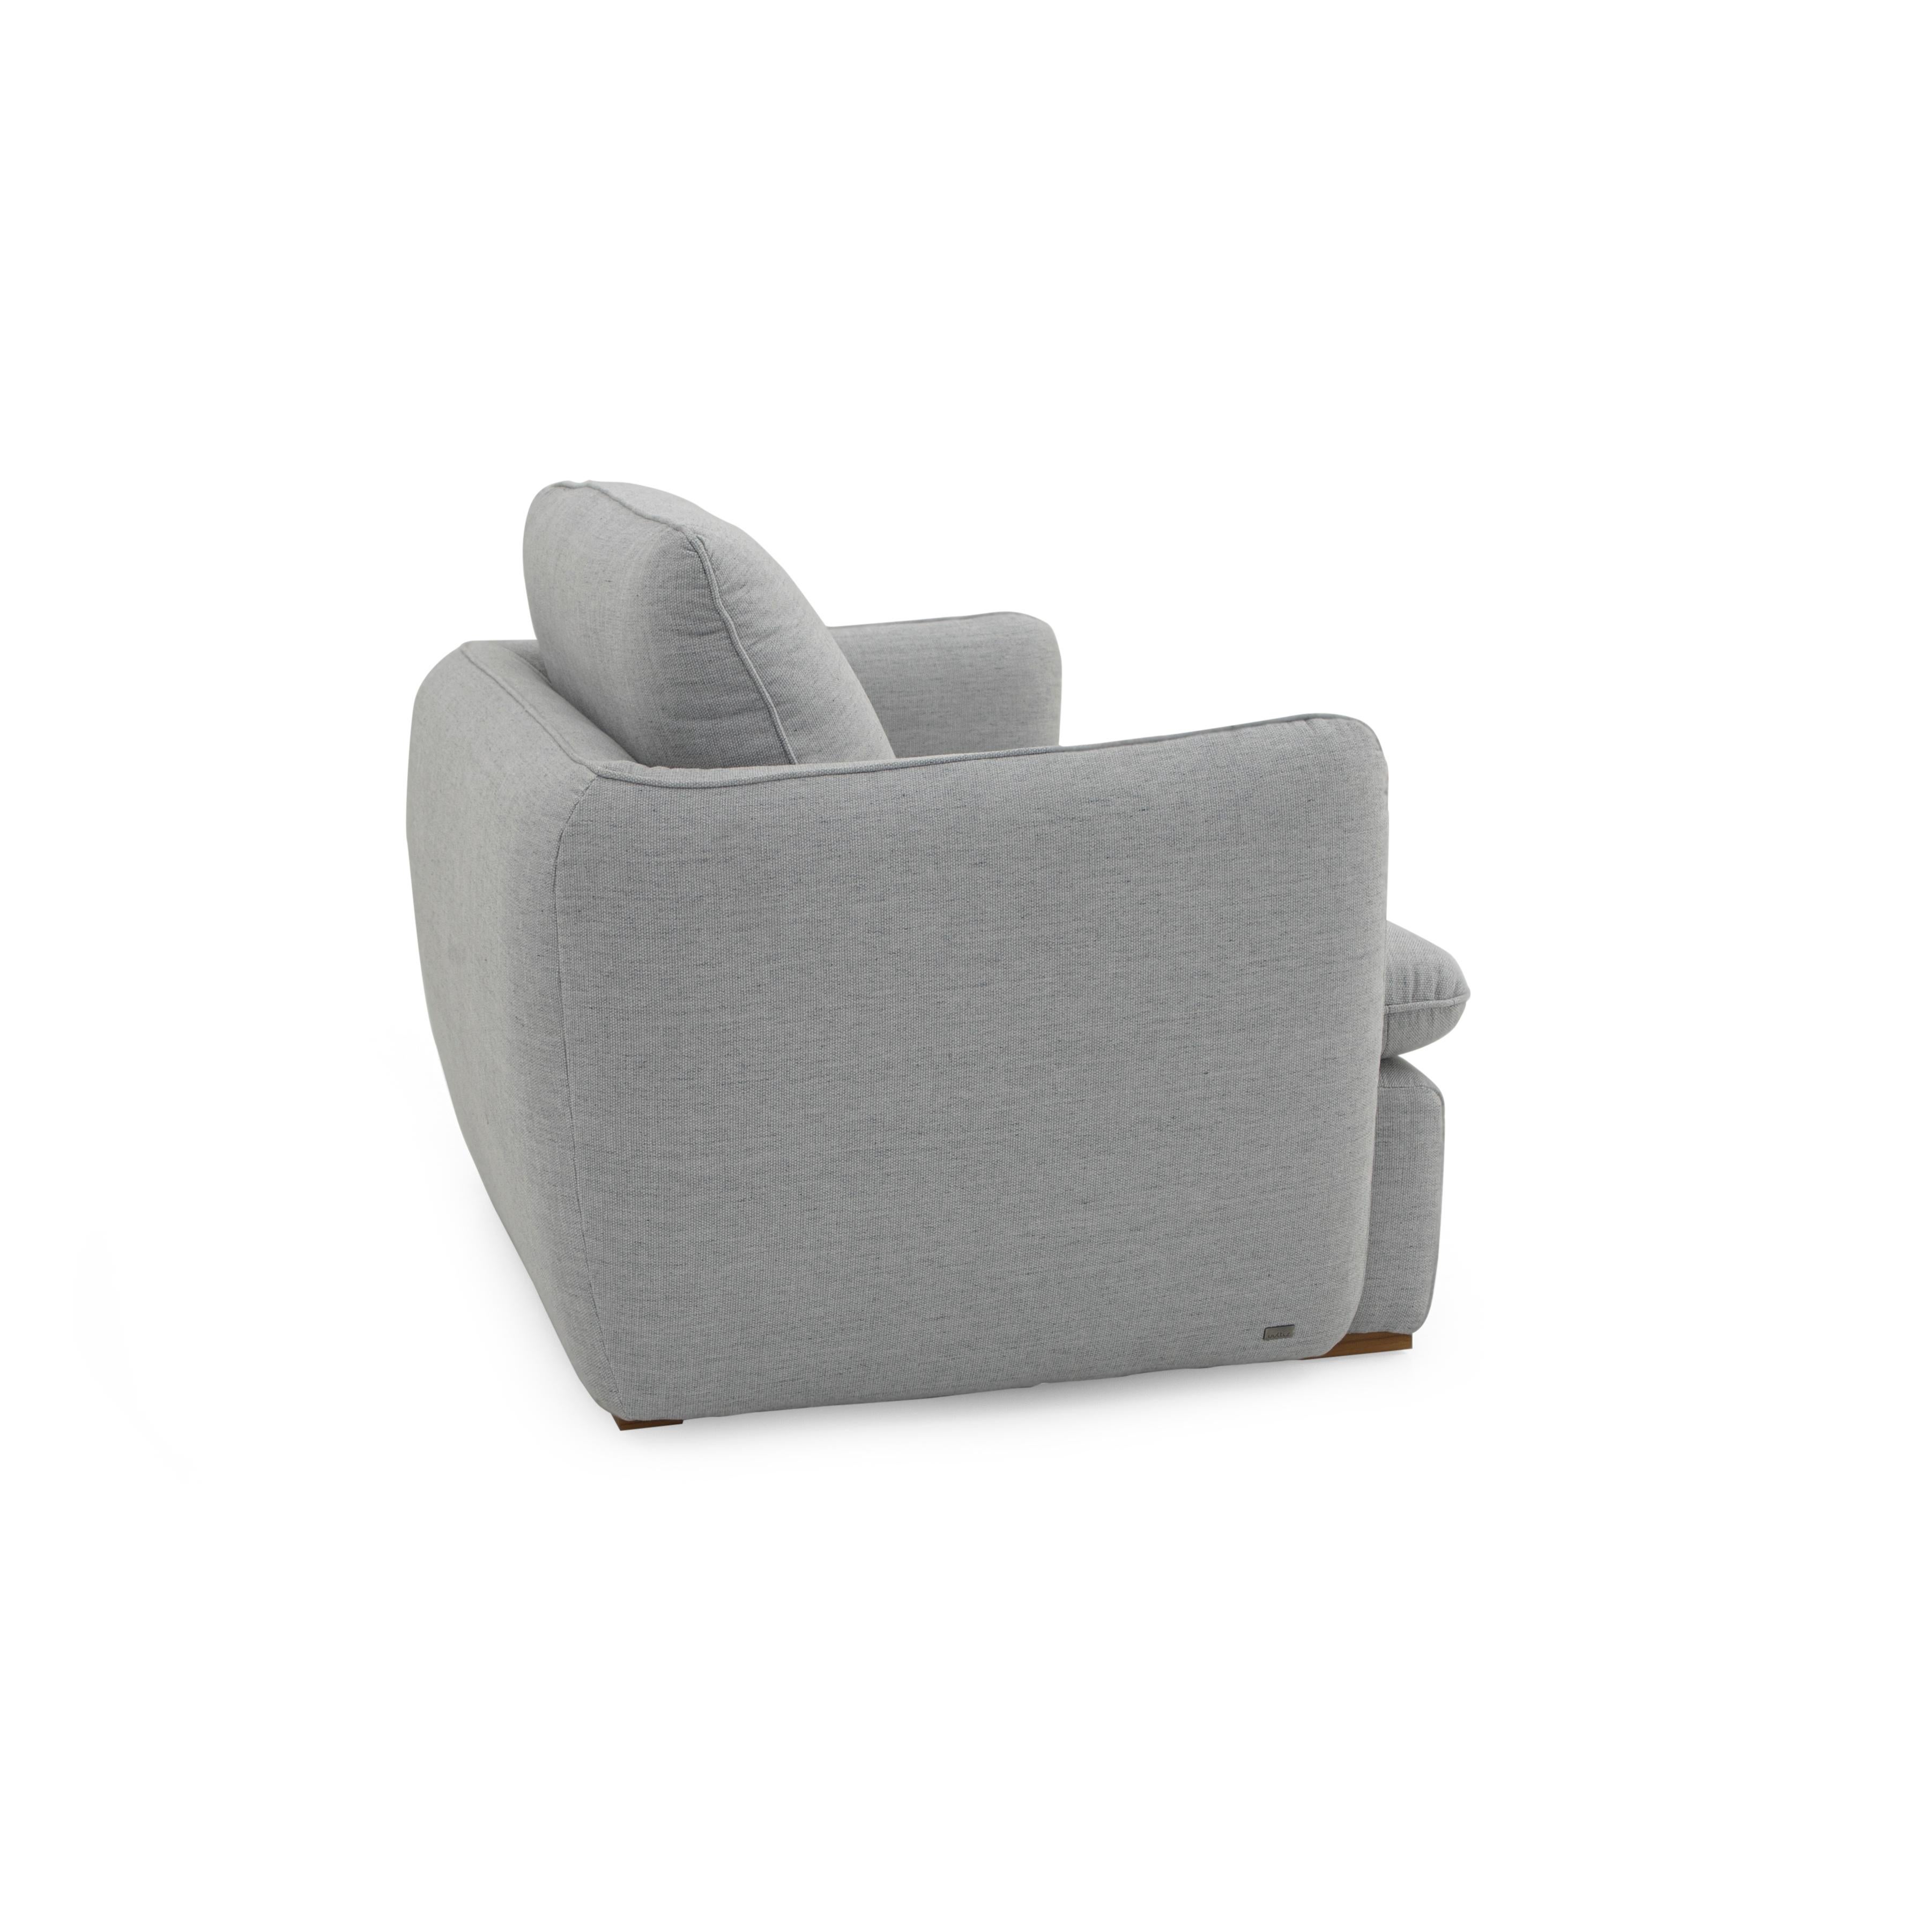 Kolo Armchair Upholstered in Light Gray Fabric In New Condition For Sale In Miami, FL